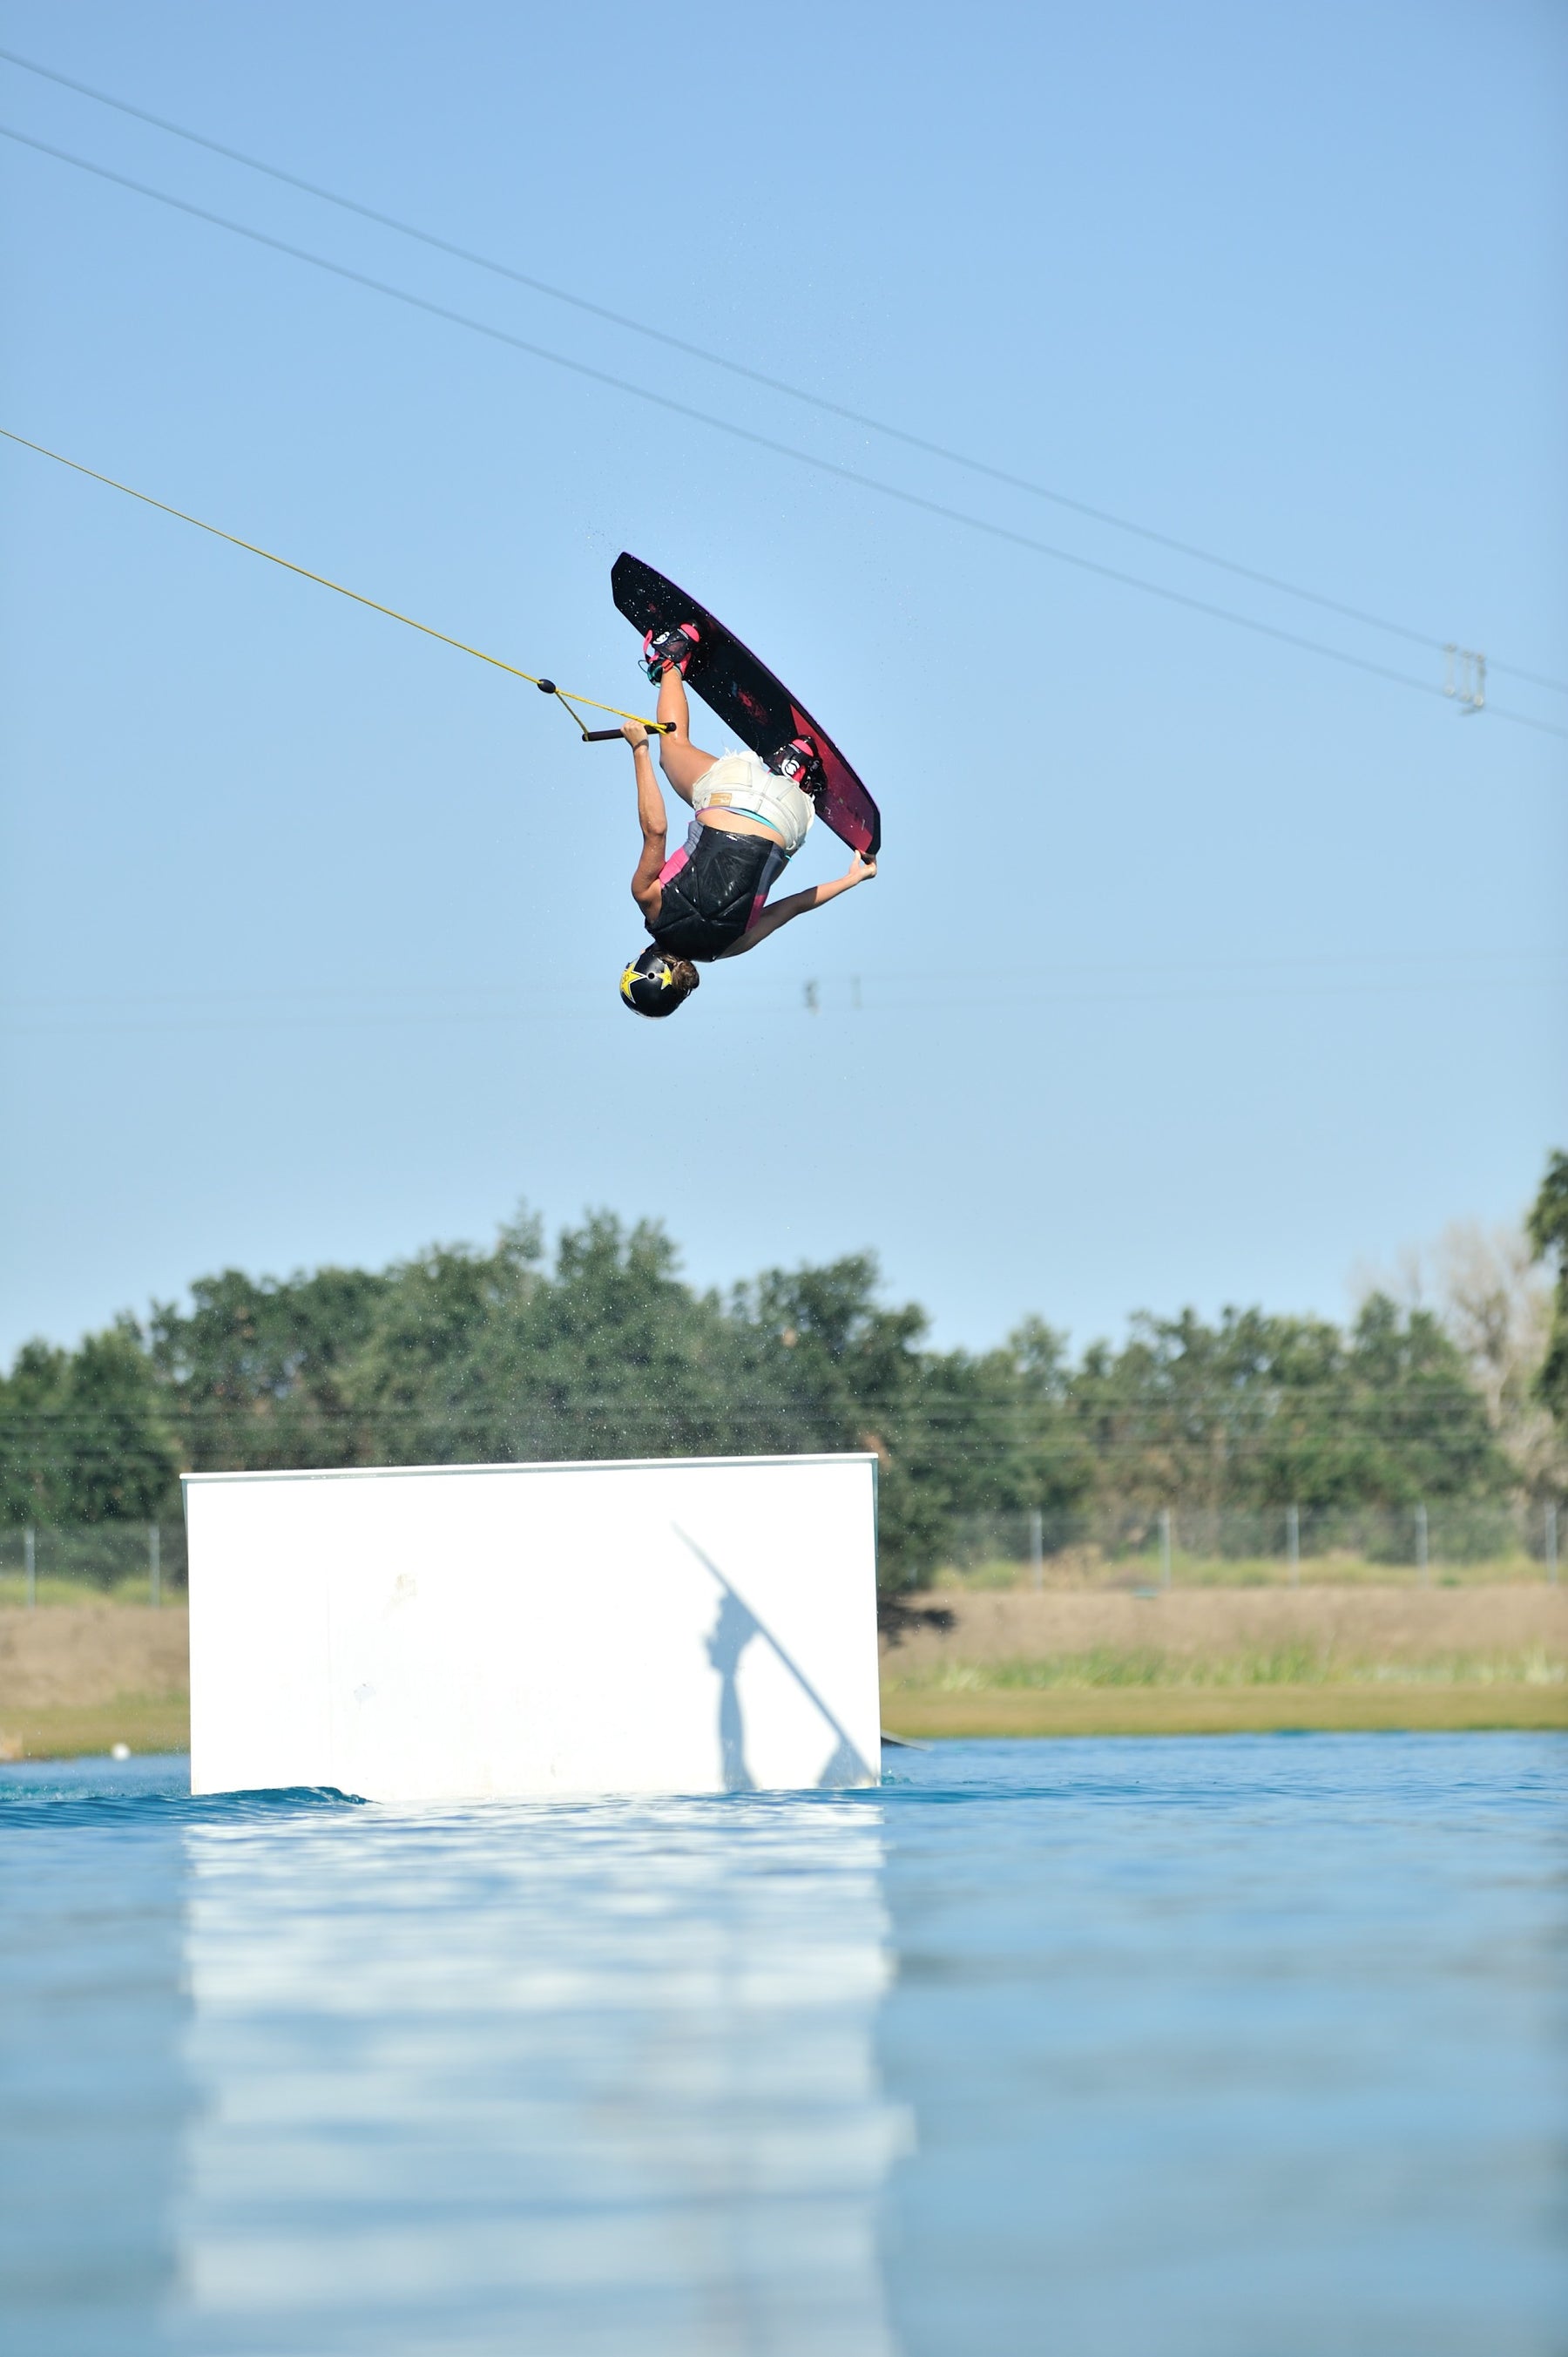 Wakeboard at Launch cable Park in Wisconsin